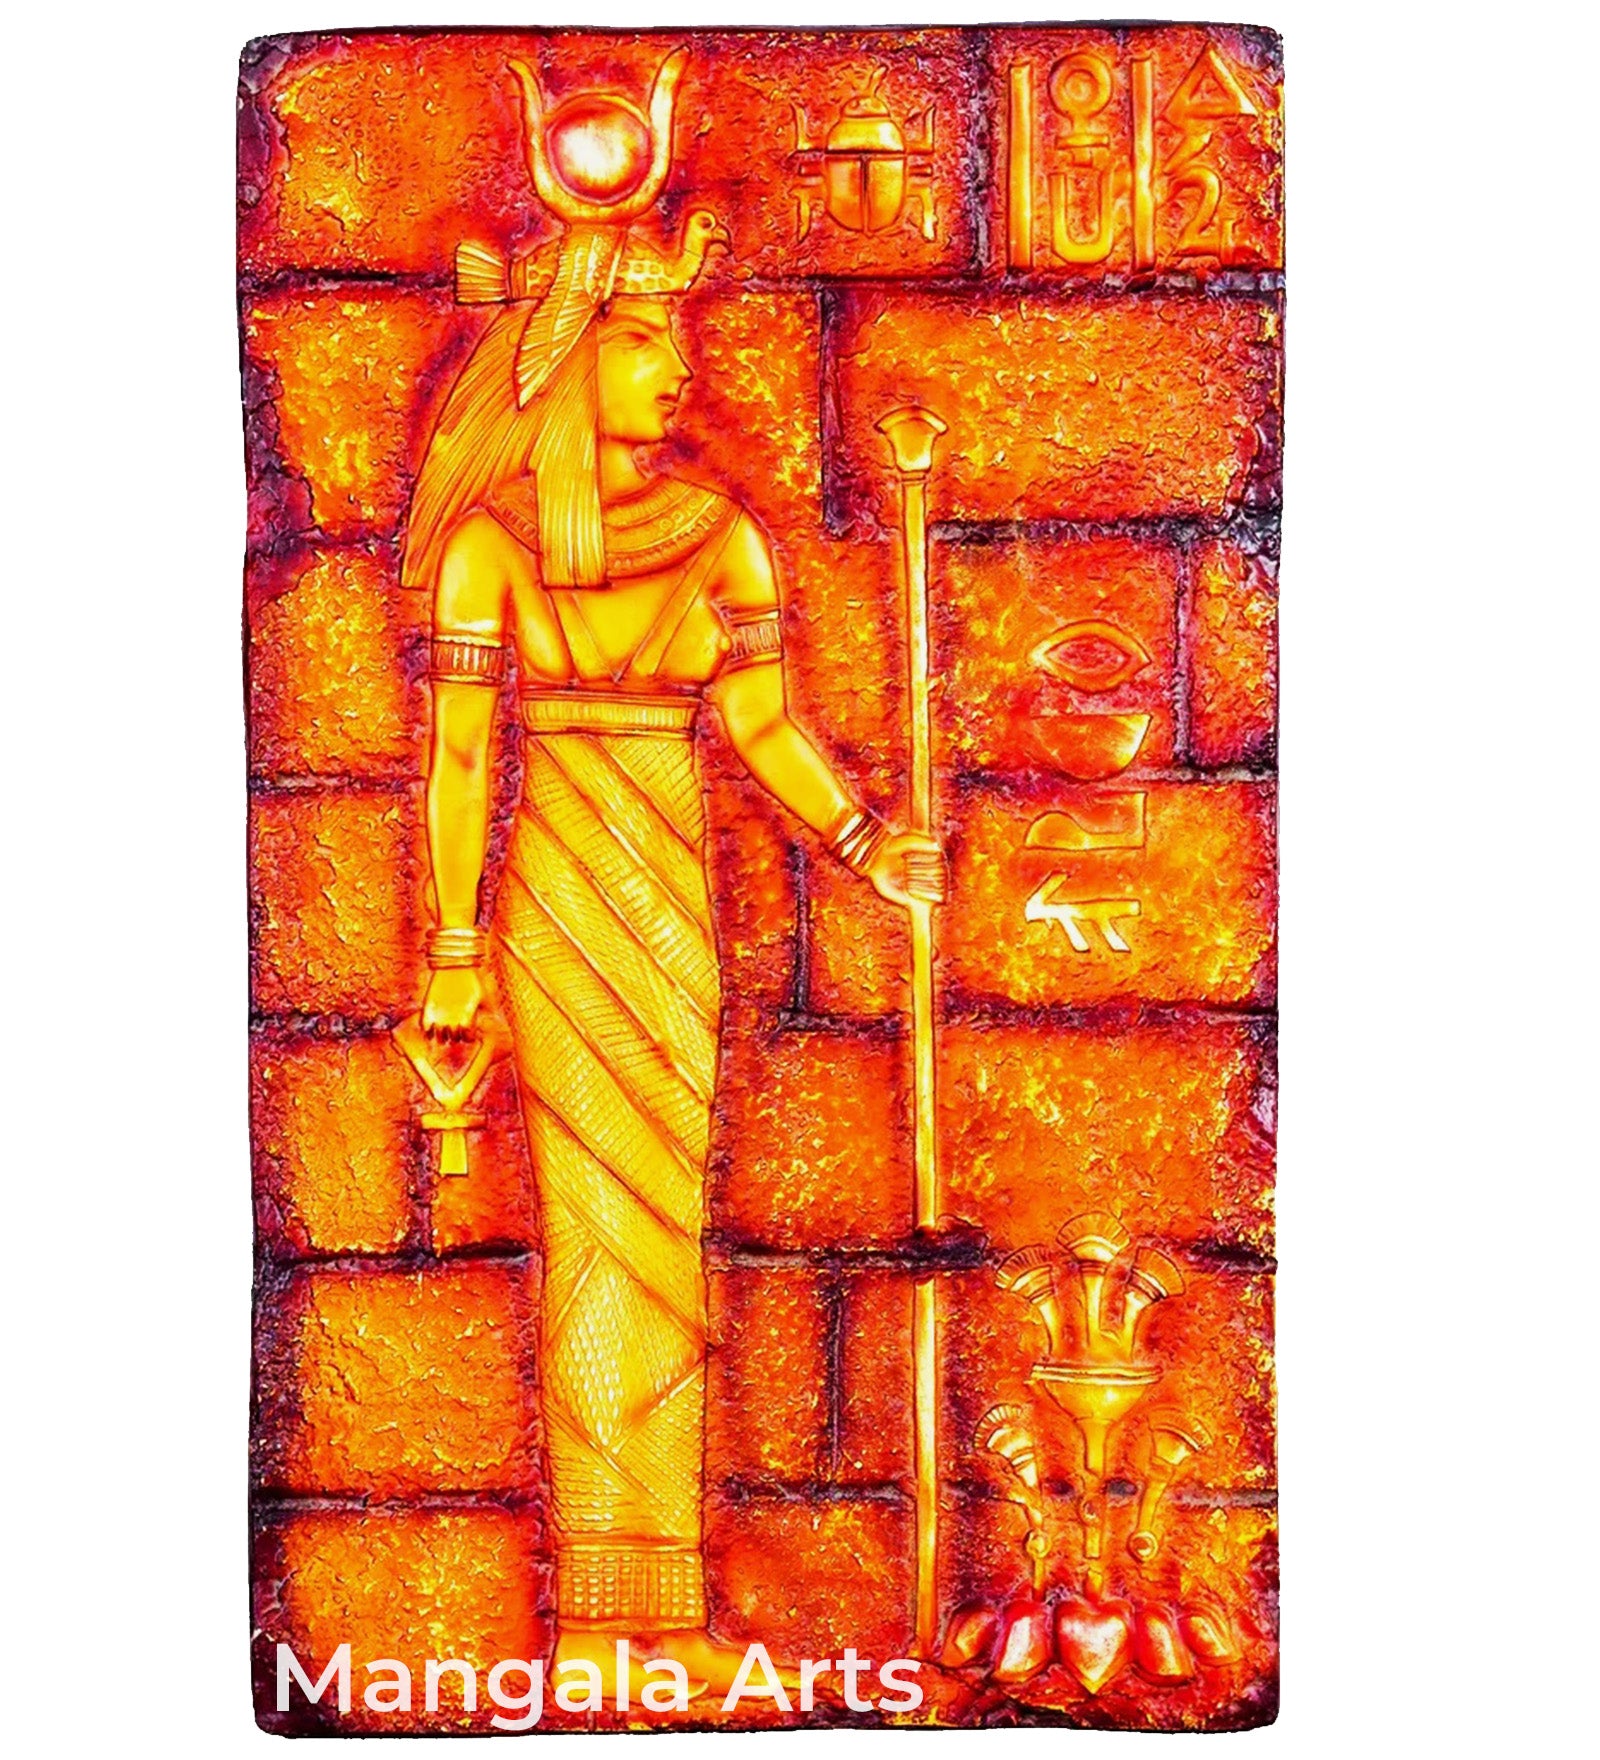 Egyption Lady Mural Work Wall Decor